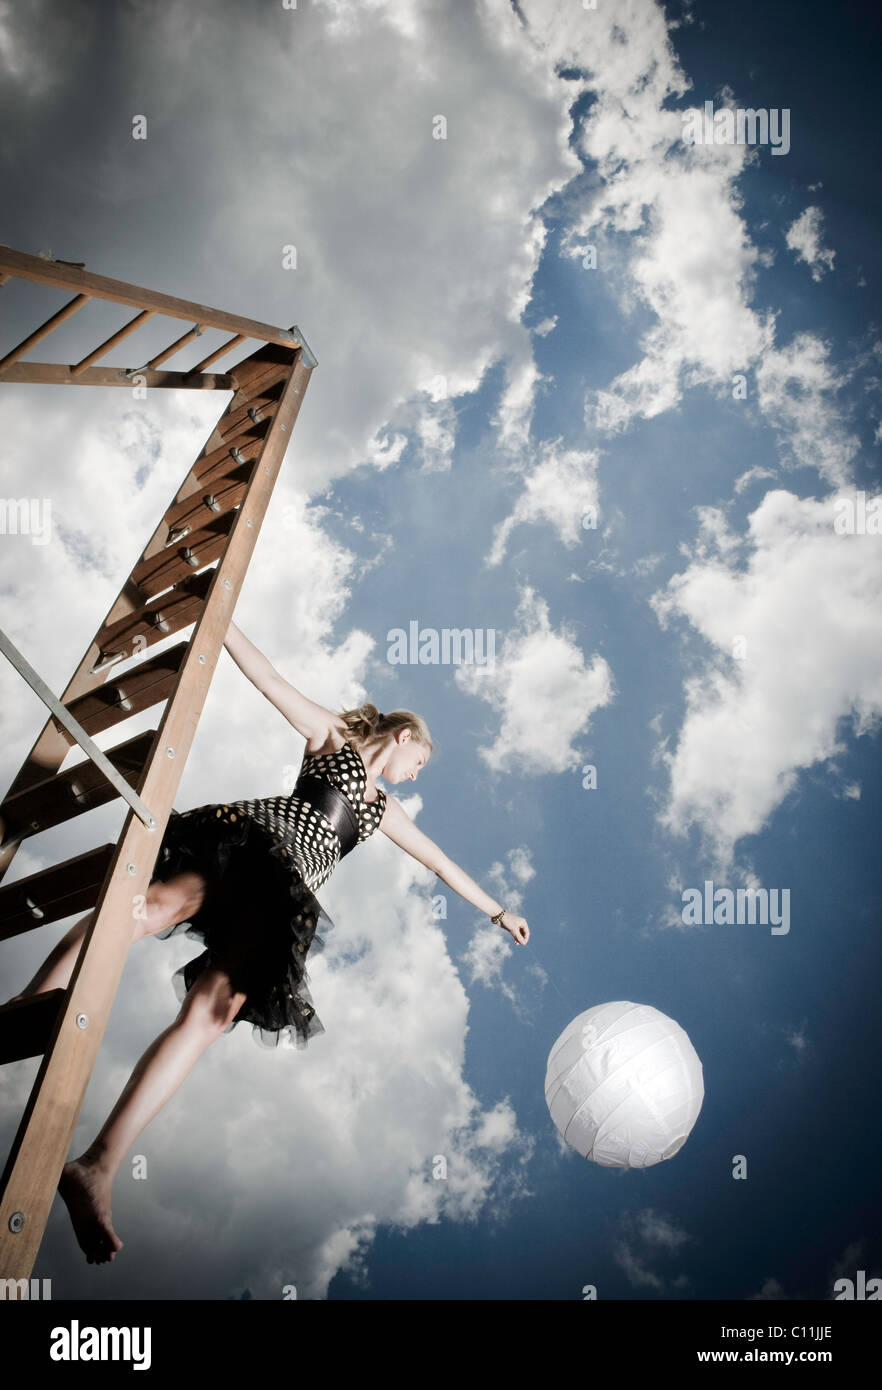 A teenage girl wearing a black and white polka dotted dress stands on a ladder while holding a white ball. Stock Photo